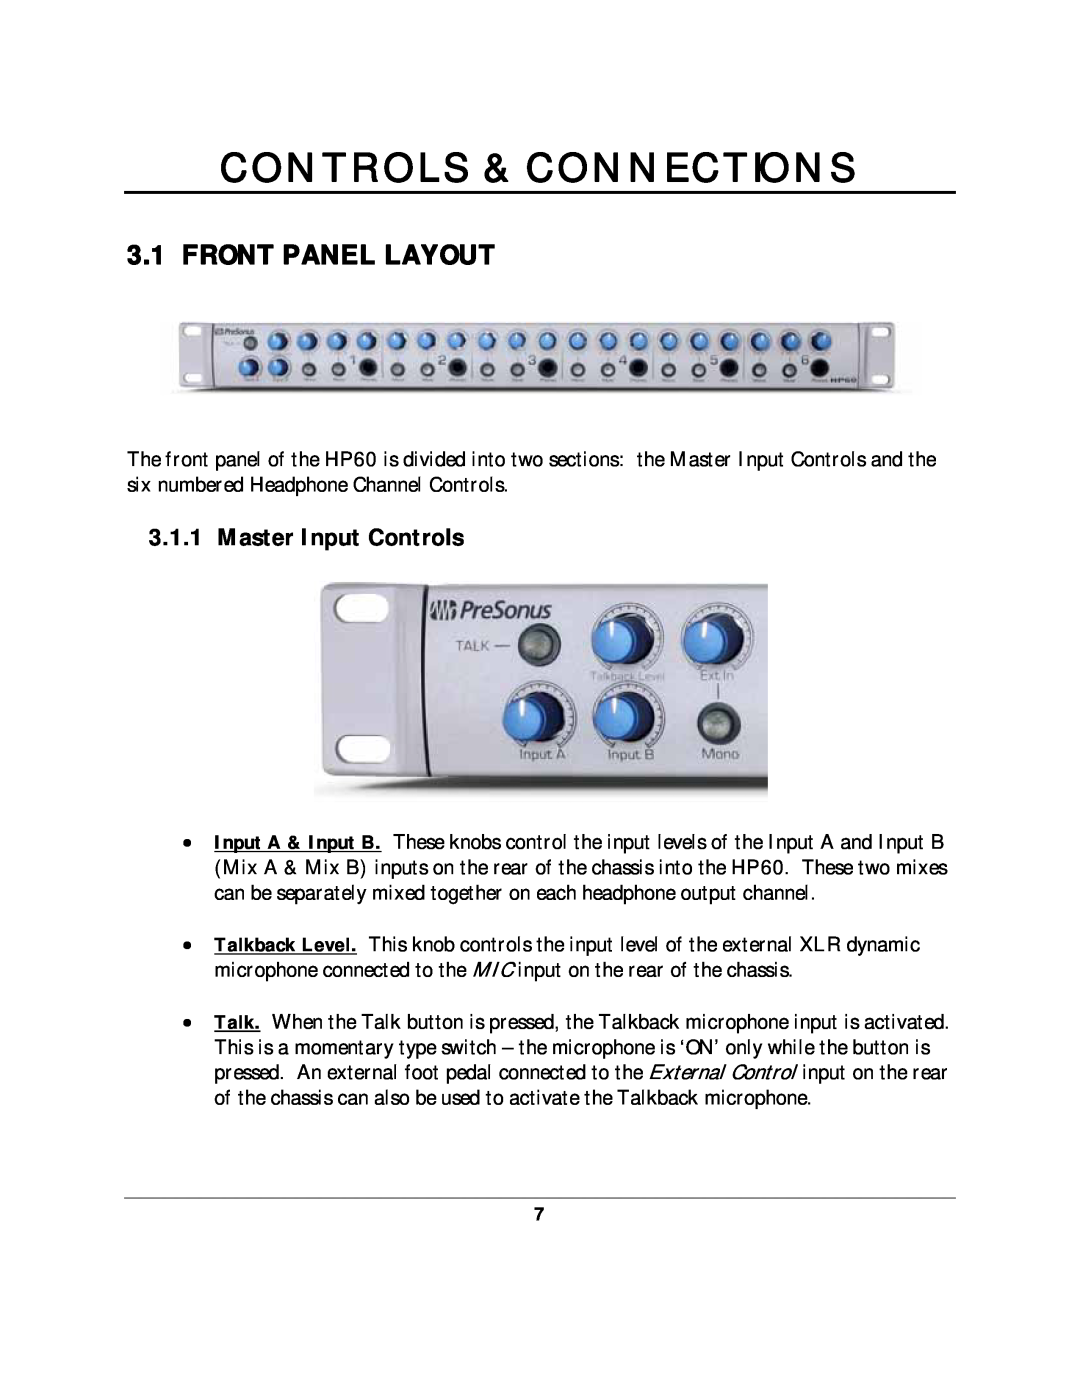 Presonus Audio electronic HP60 manual Controls & Connections, Front Panel Layout, Master Input Controls 